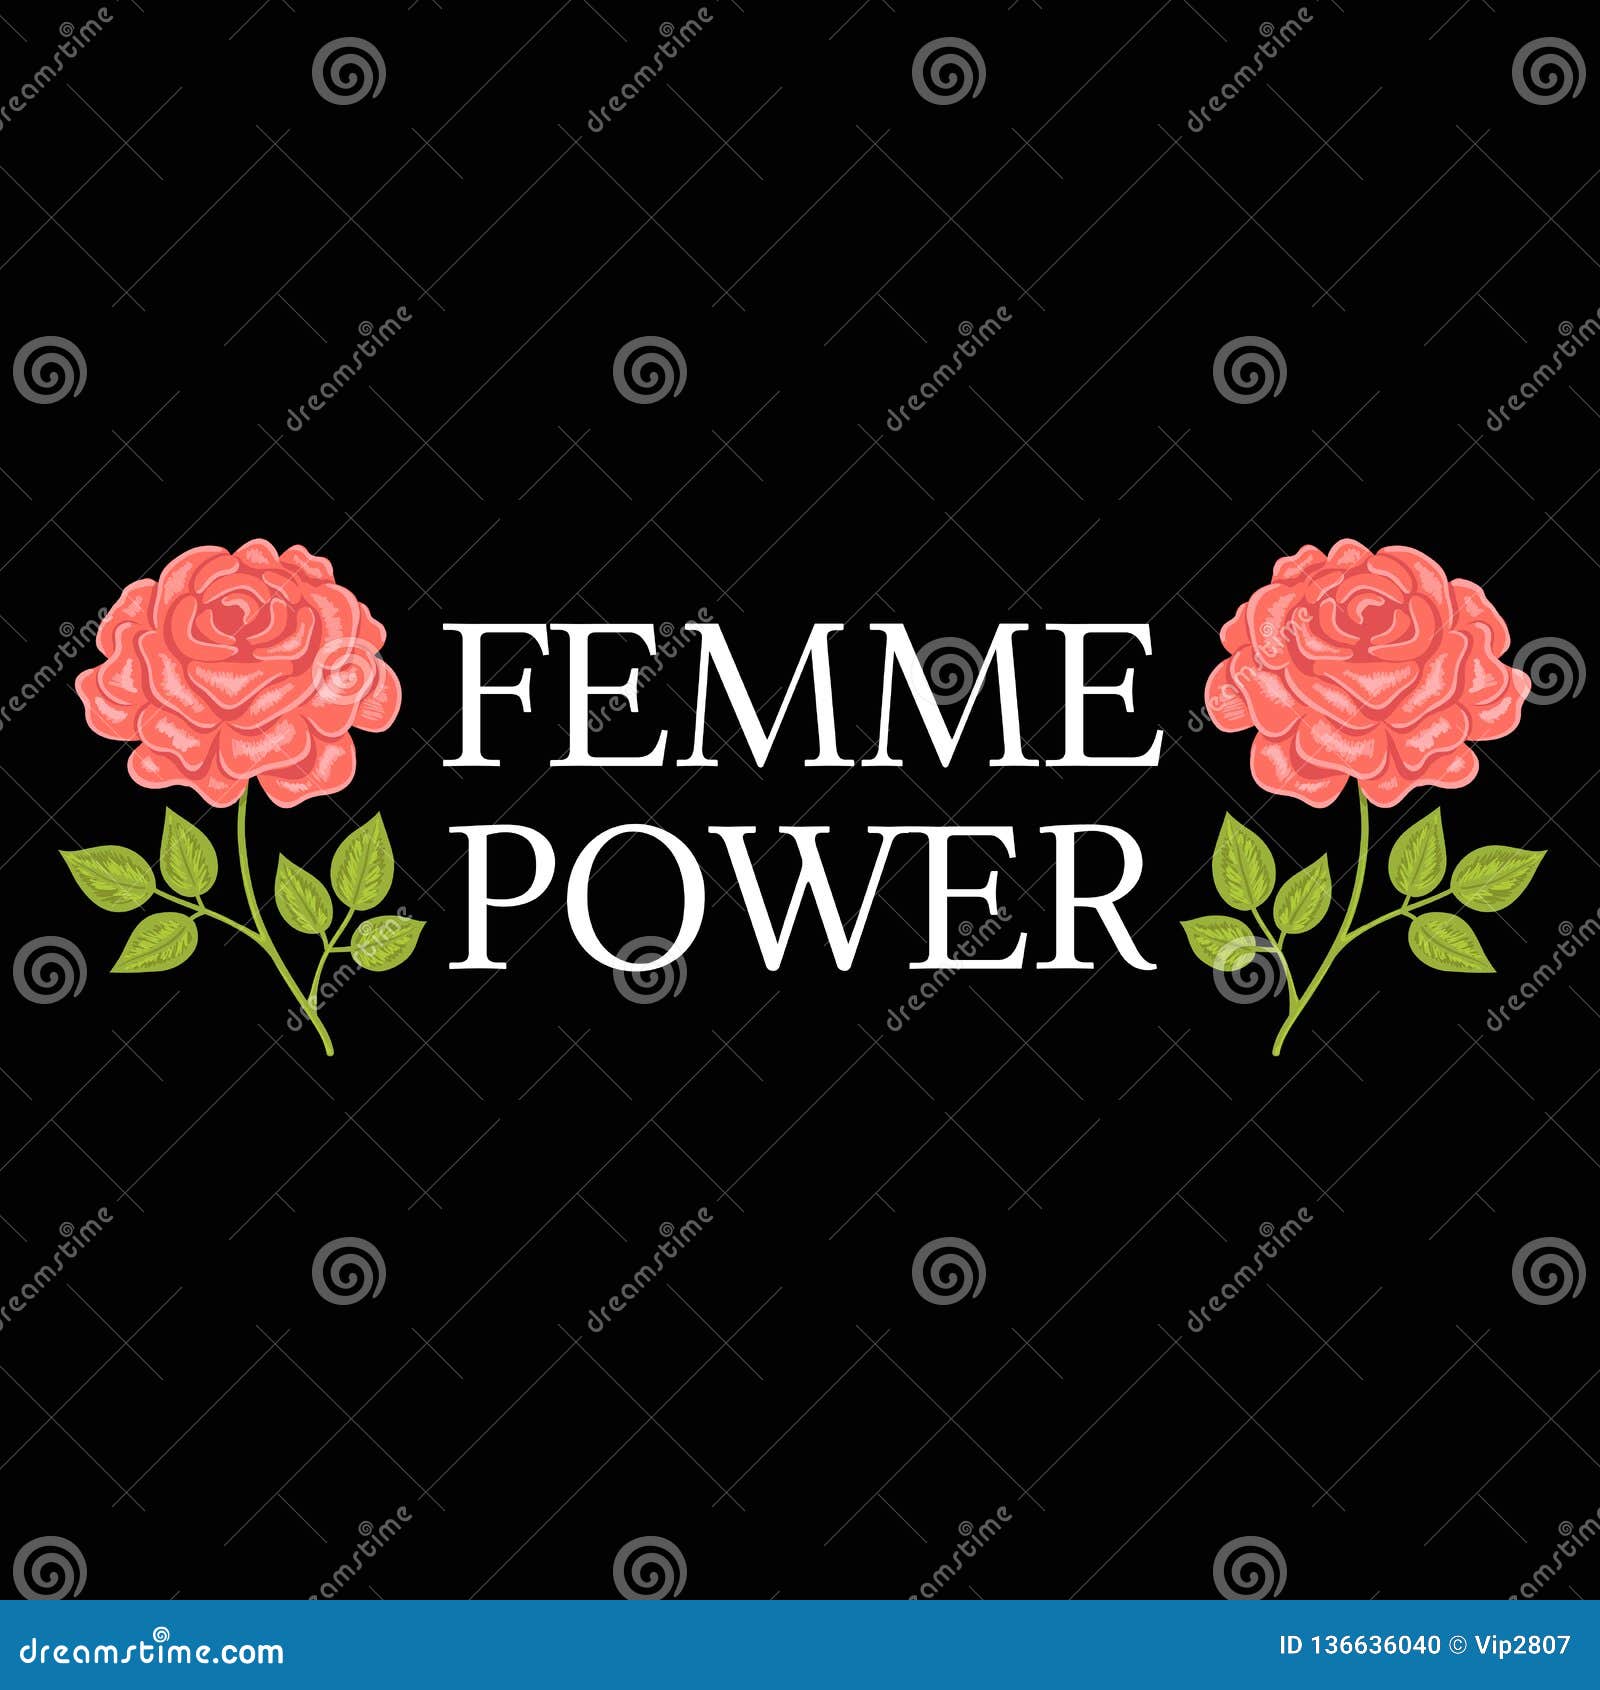 Femme Power, Slogan Graphic with Vector Illustration, for T-shirt ...